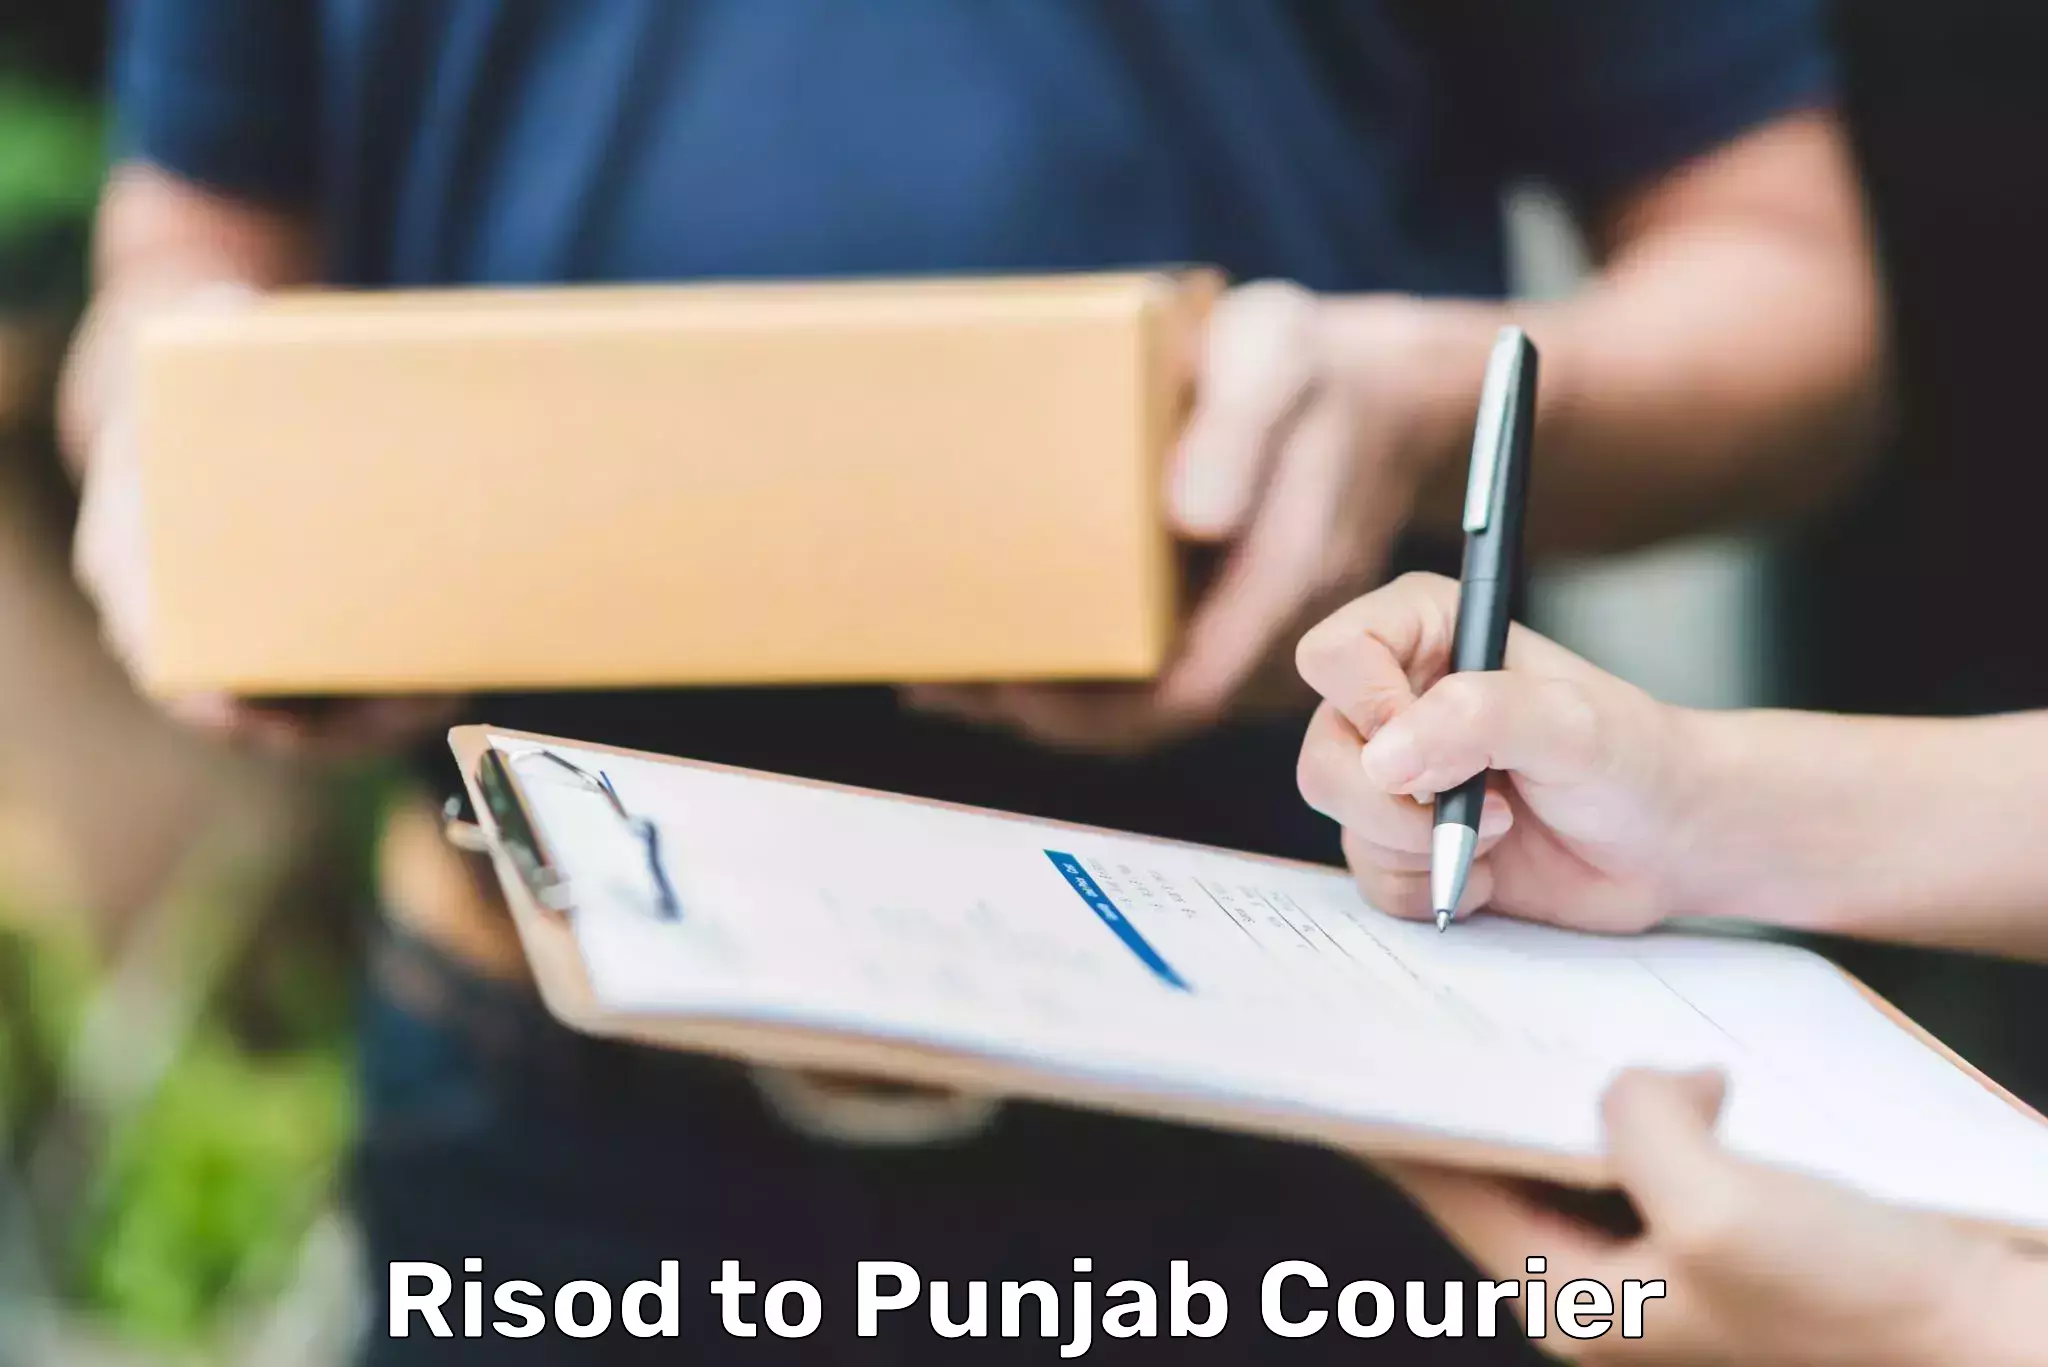 Courier services in Risod to Faridkot